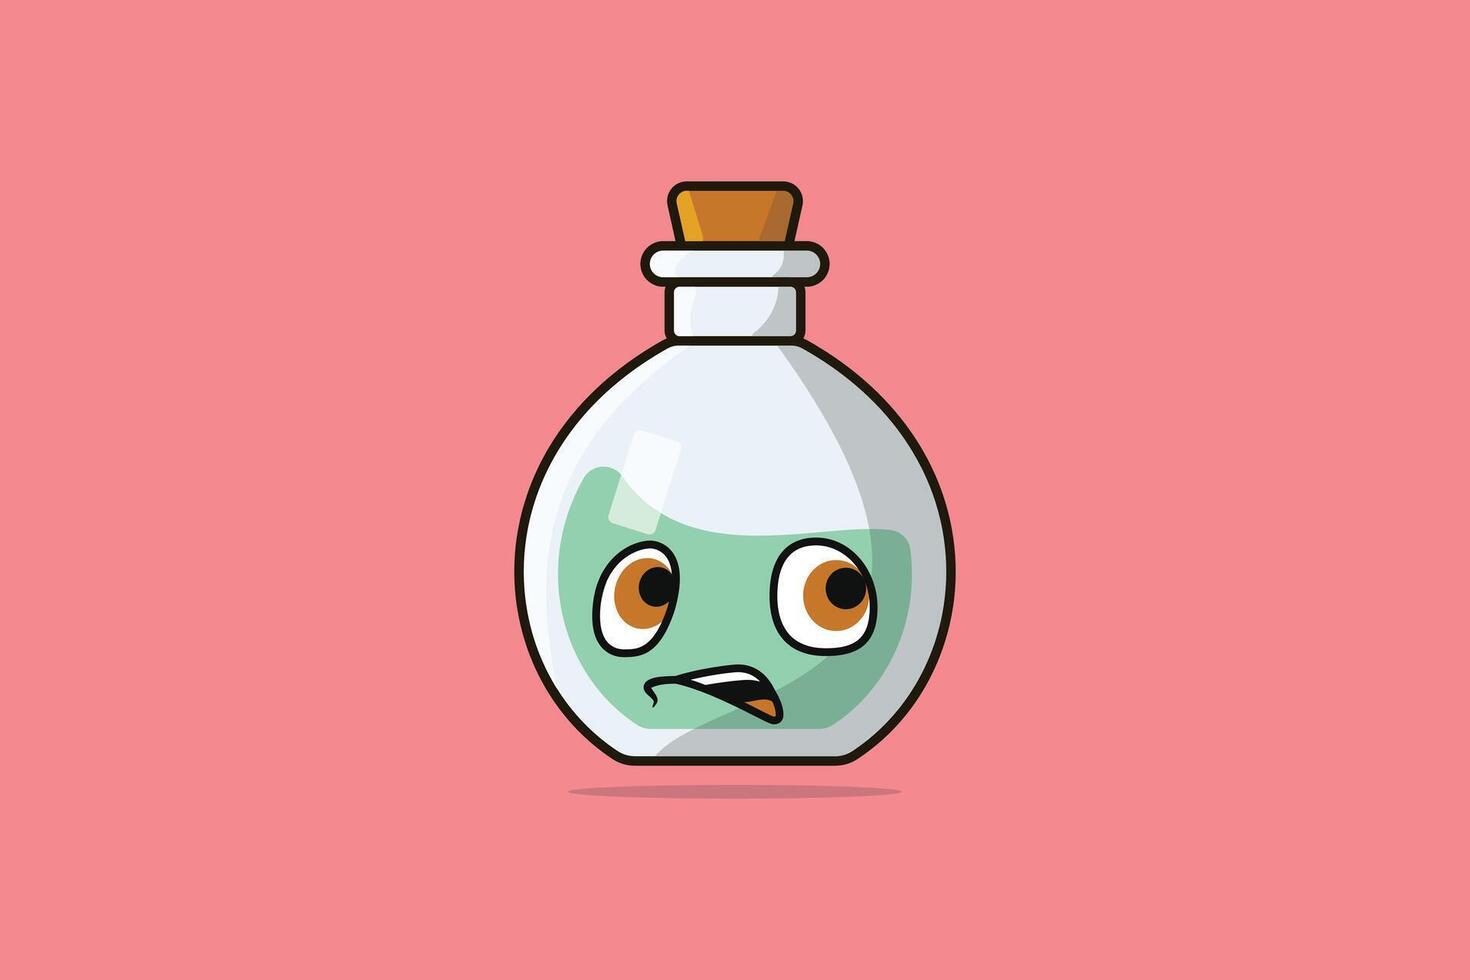 Potion Bottle with Cartoon Face vector illustration. Science object icon concept. Cartoon face with Potion vector design. Cartoon character drink design.